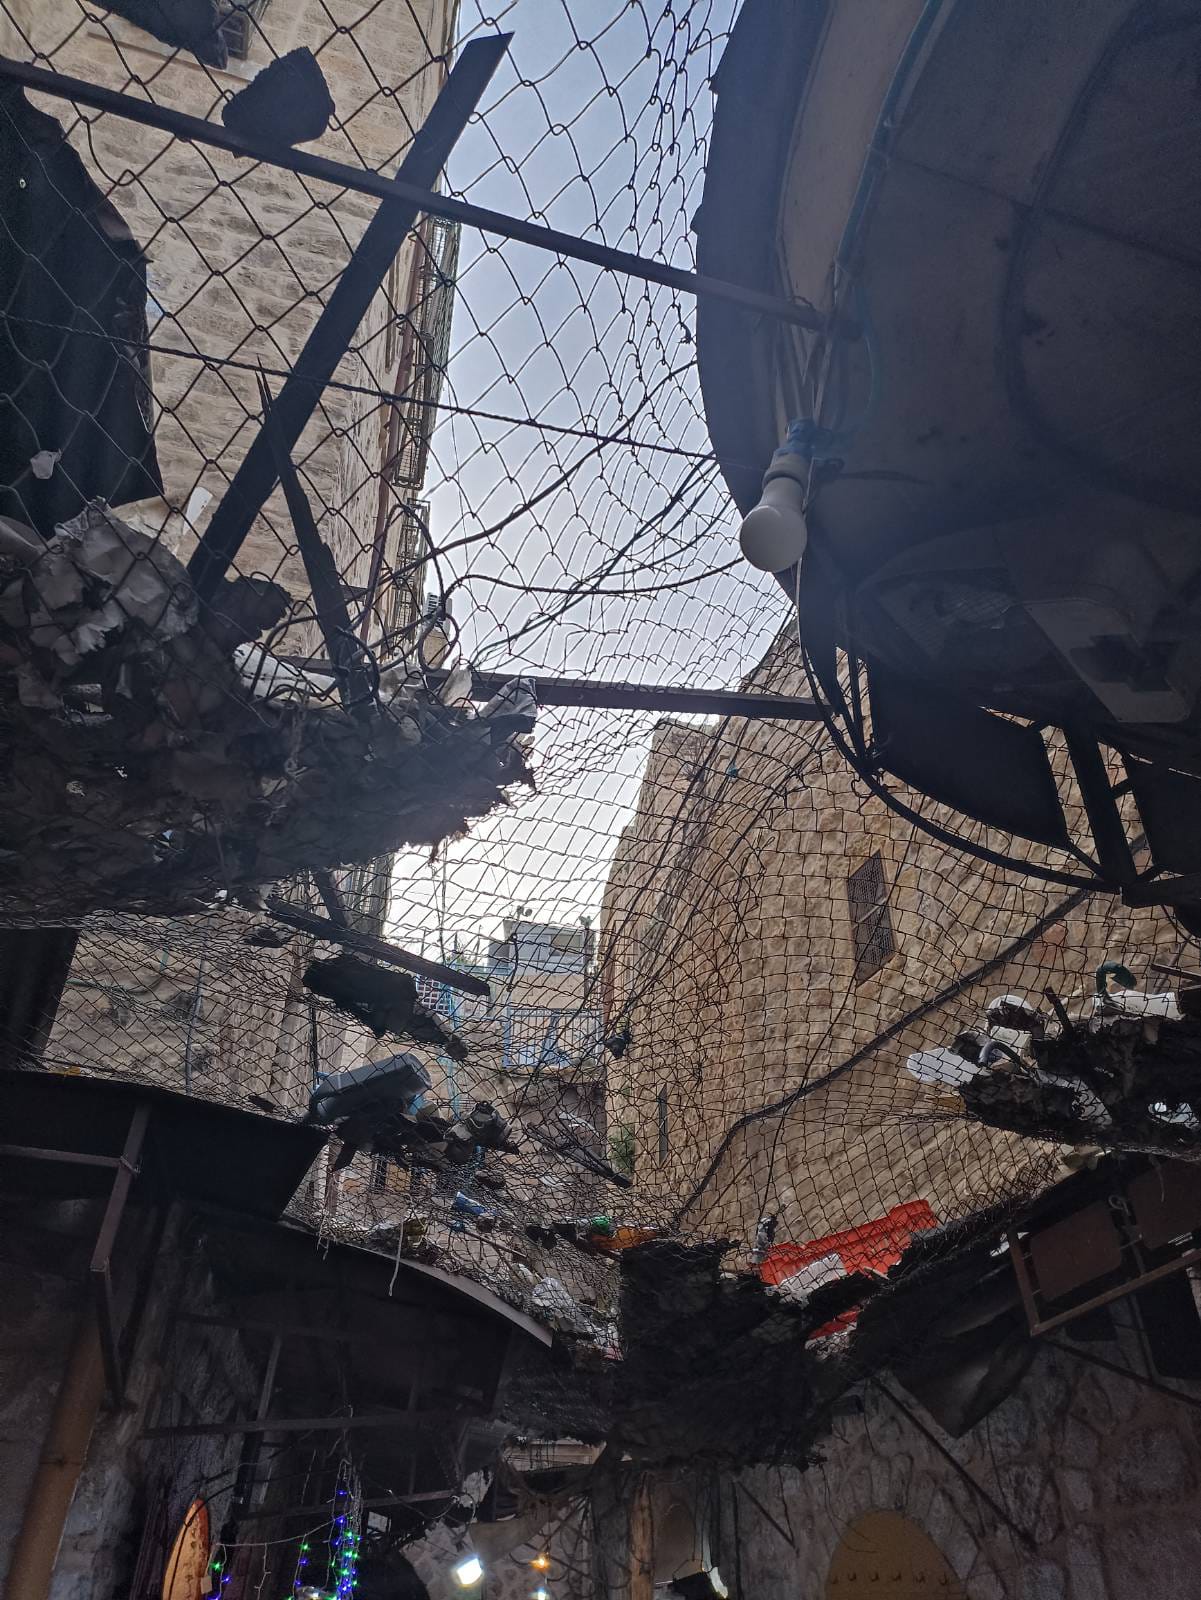 Israeli settlement right above a Palestinian market street in the Old City of Hebron. Palestinians had to put up nets in order to protect themselves from the trash settlers throw at them. Photo: Izzat Karaki